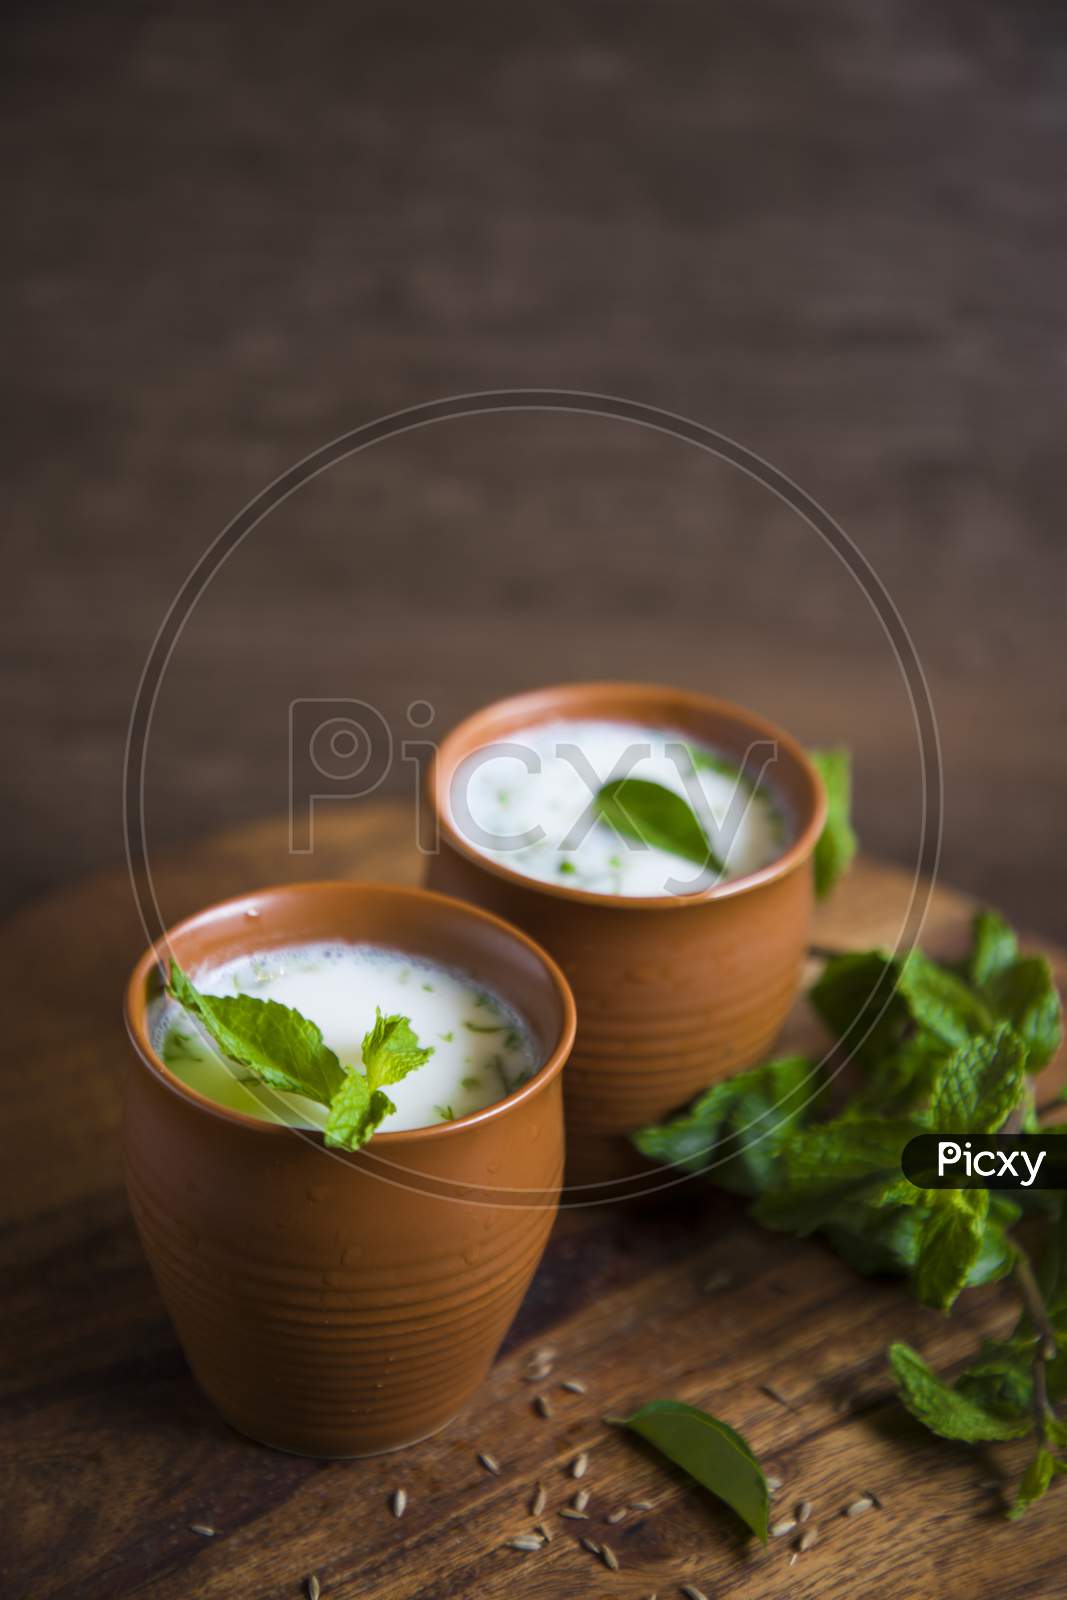 Summer Cooler Drink  Buttermilk  Made Of Yogurt And Spice Herbs Over a  Wooden Background